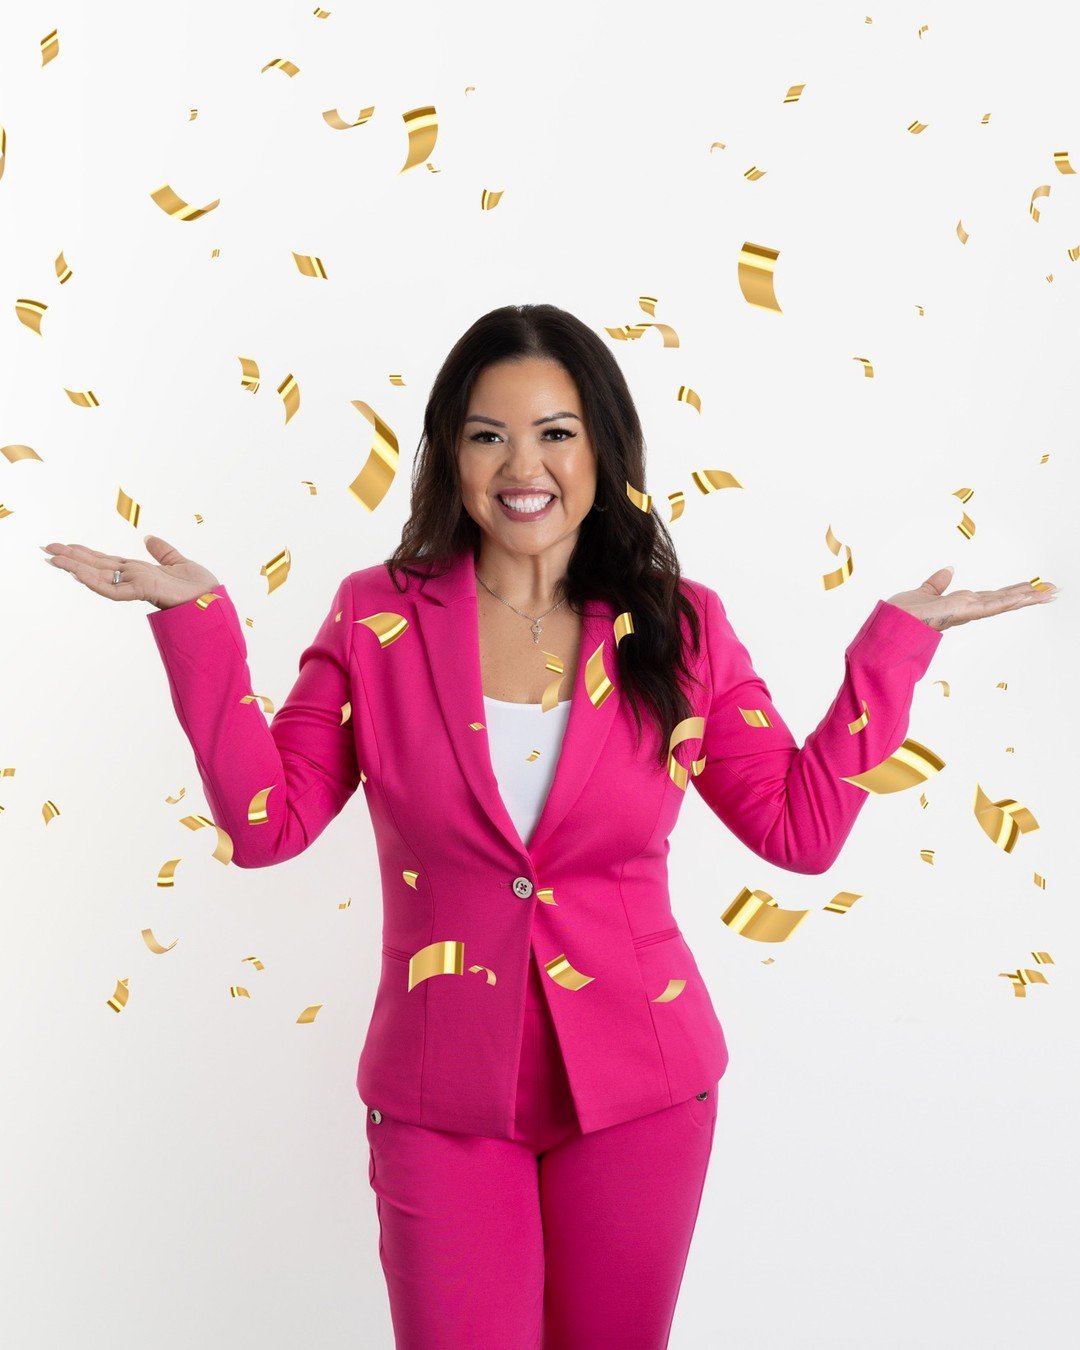 Oh my goodness so many great branding images for REALTOR Sonia Graham ! From the props, outfits, and poses I think we nailed it with Sonia's personality, style, and brand. What do you think?
If you are looking for a Realtor, check her out https://www